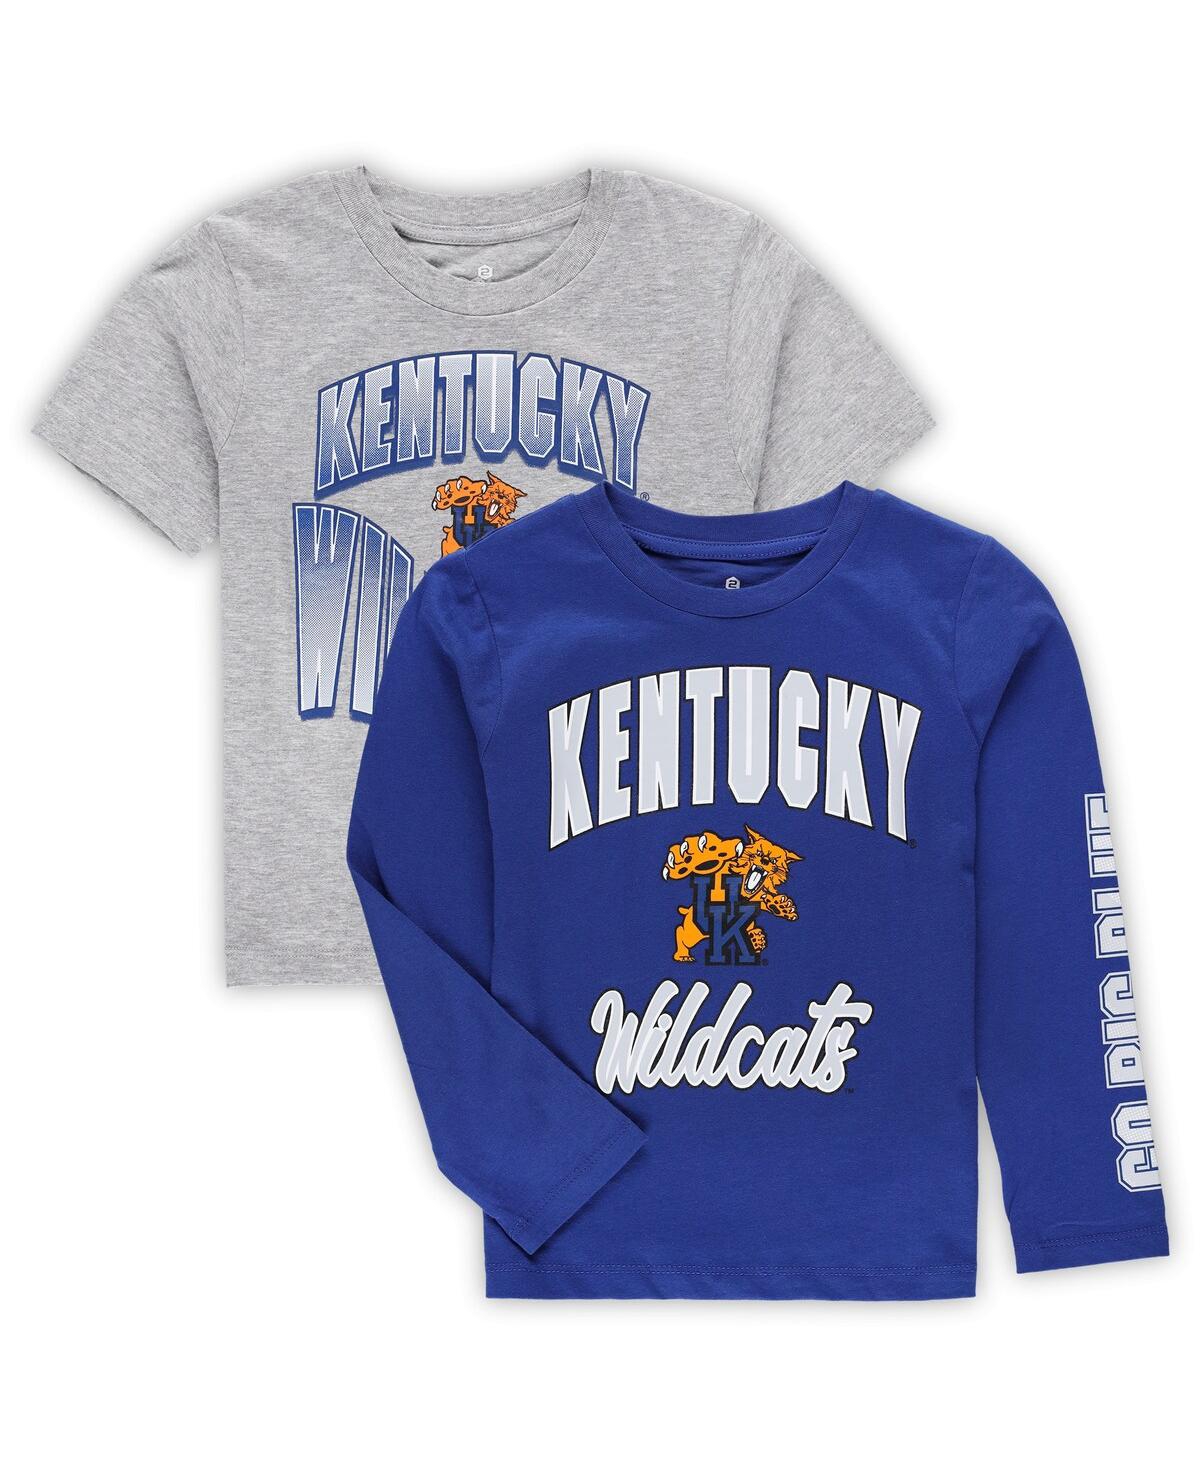 Outerstuff Babies' Little Boys Royal, Heather Gray Kentucky Wildcats Game Day T-shirt Combo Pack In Royal,heather Gray